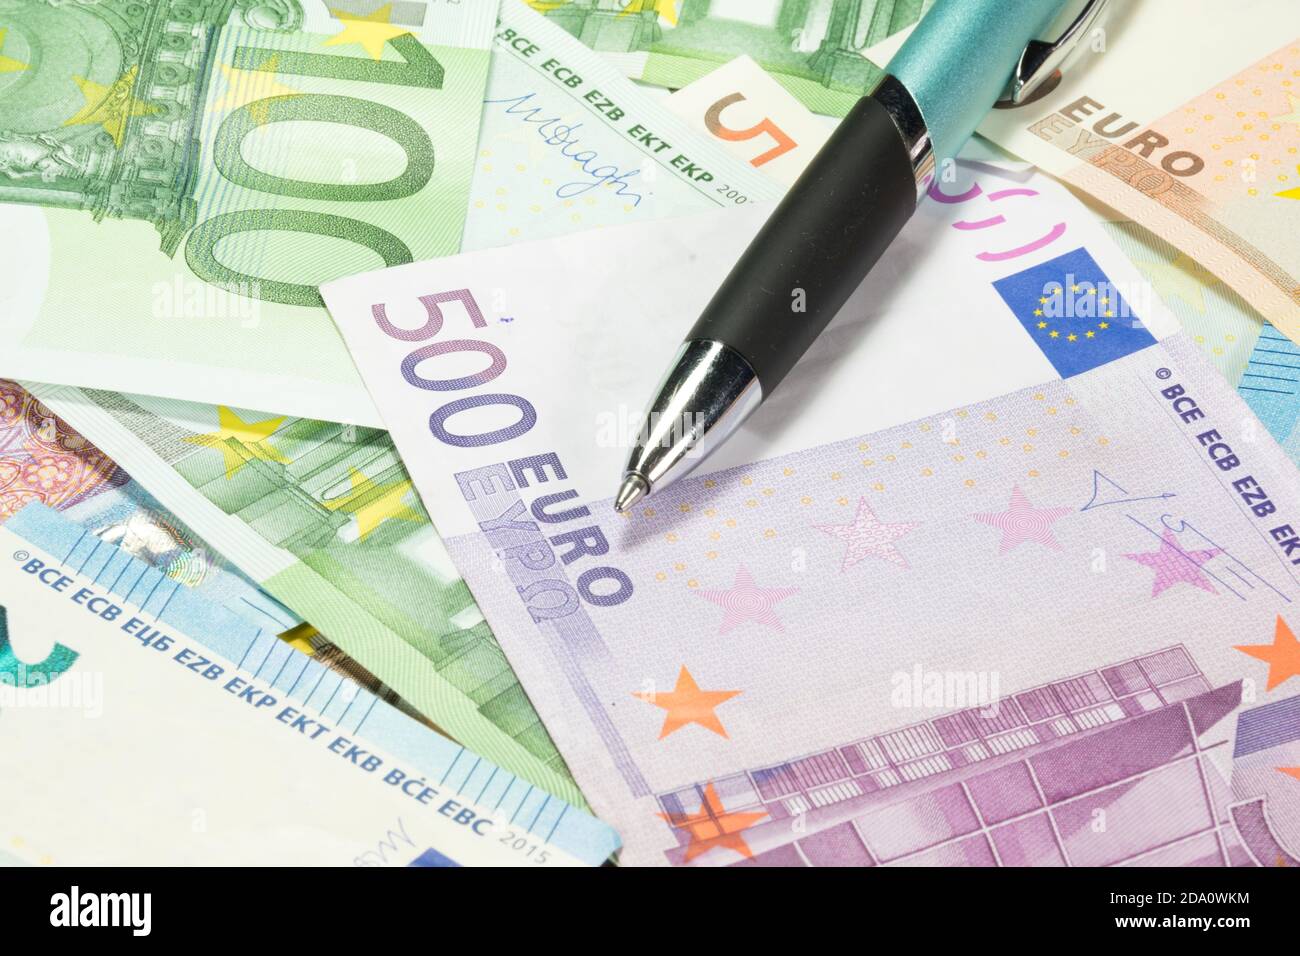 A ballpoint pen and lots of euro bills Stock Photo